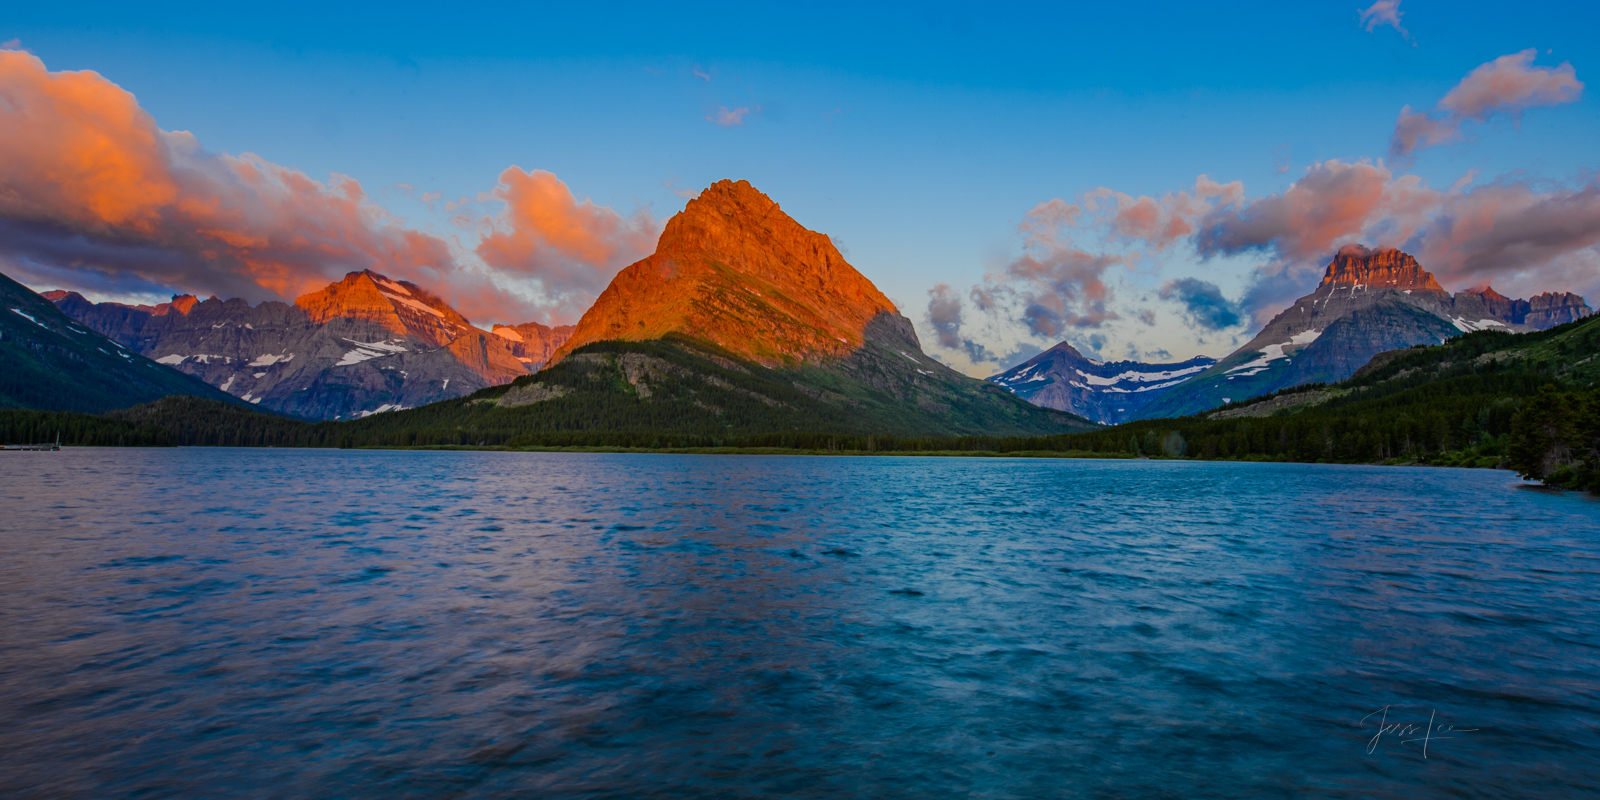 Red Sunrise picture of Glacier National Park. A fine Art Limited Edition Print of sunset at Glacier. Order yours today and enjoy...